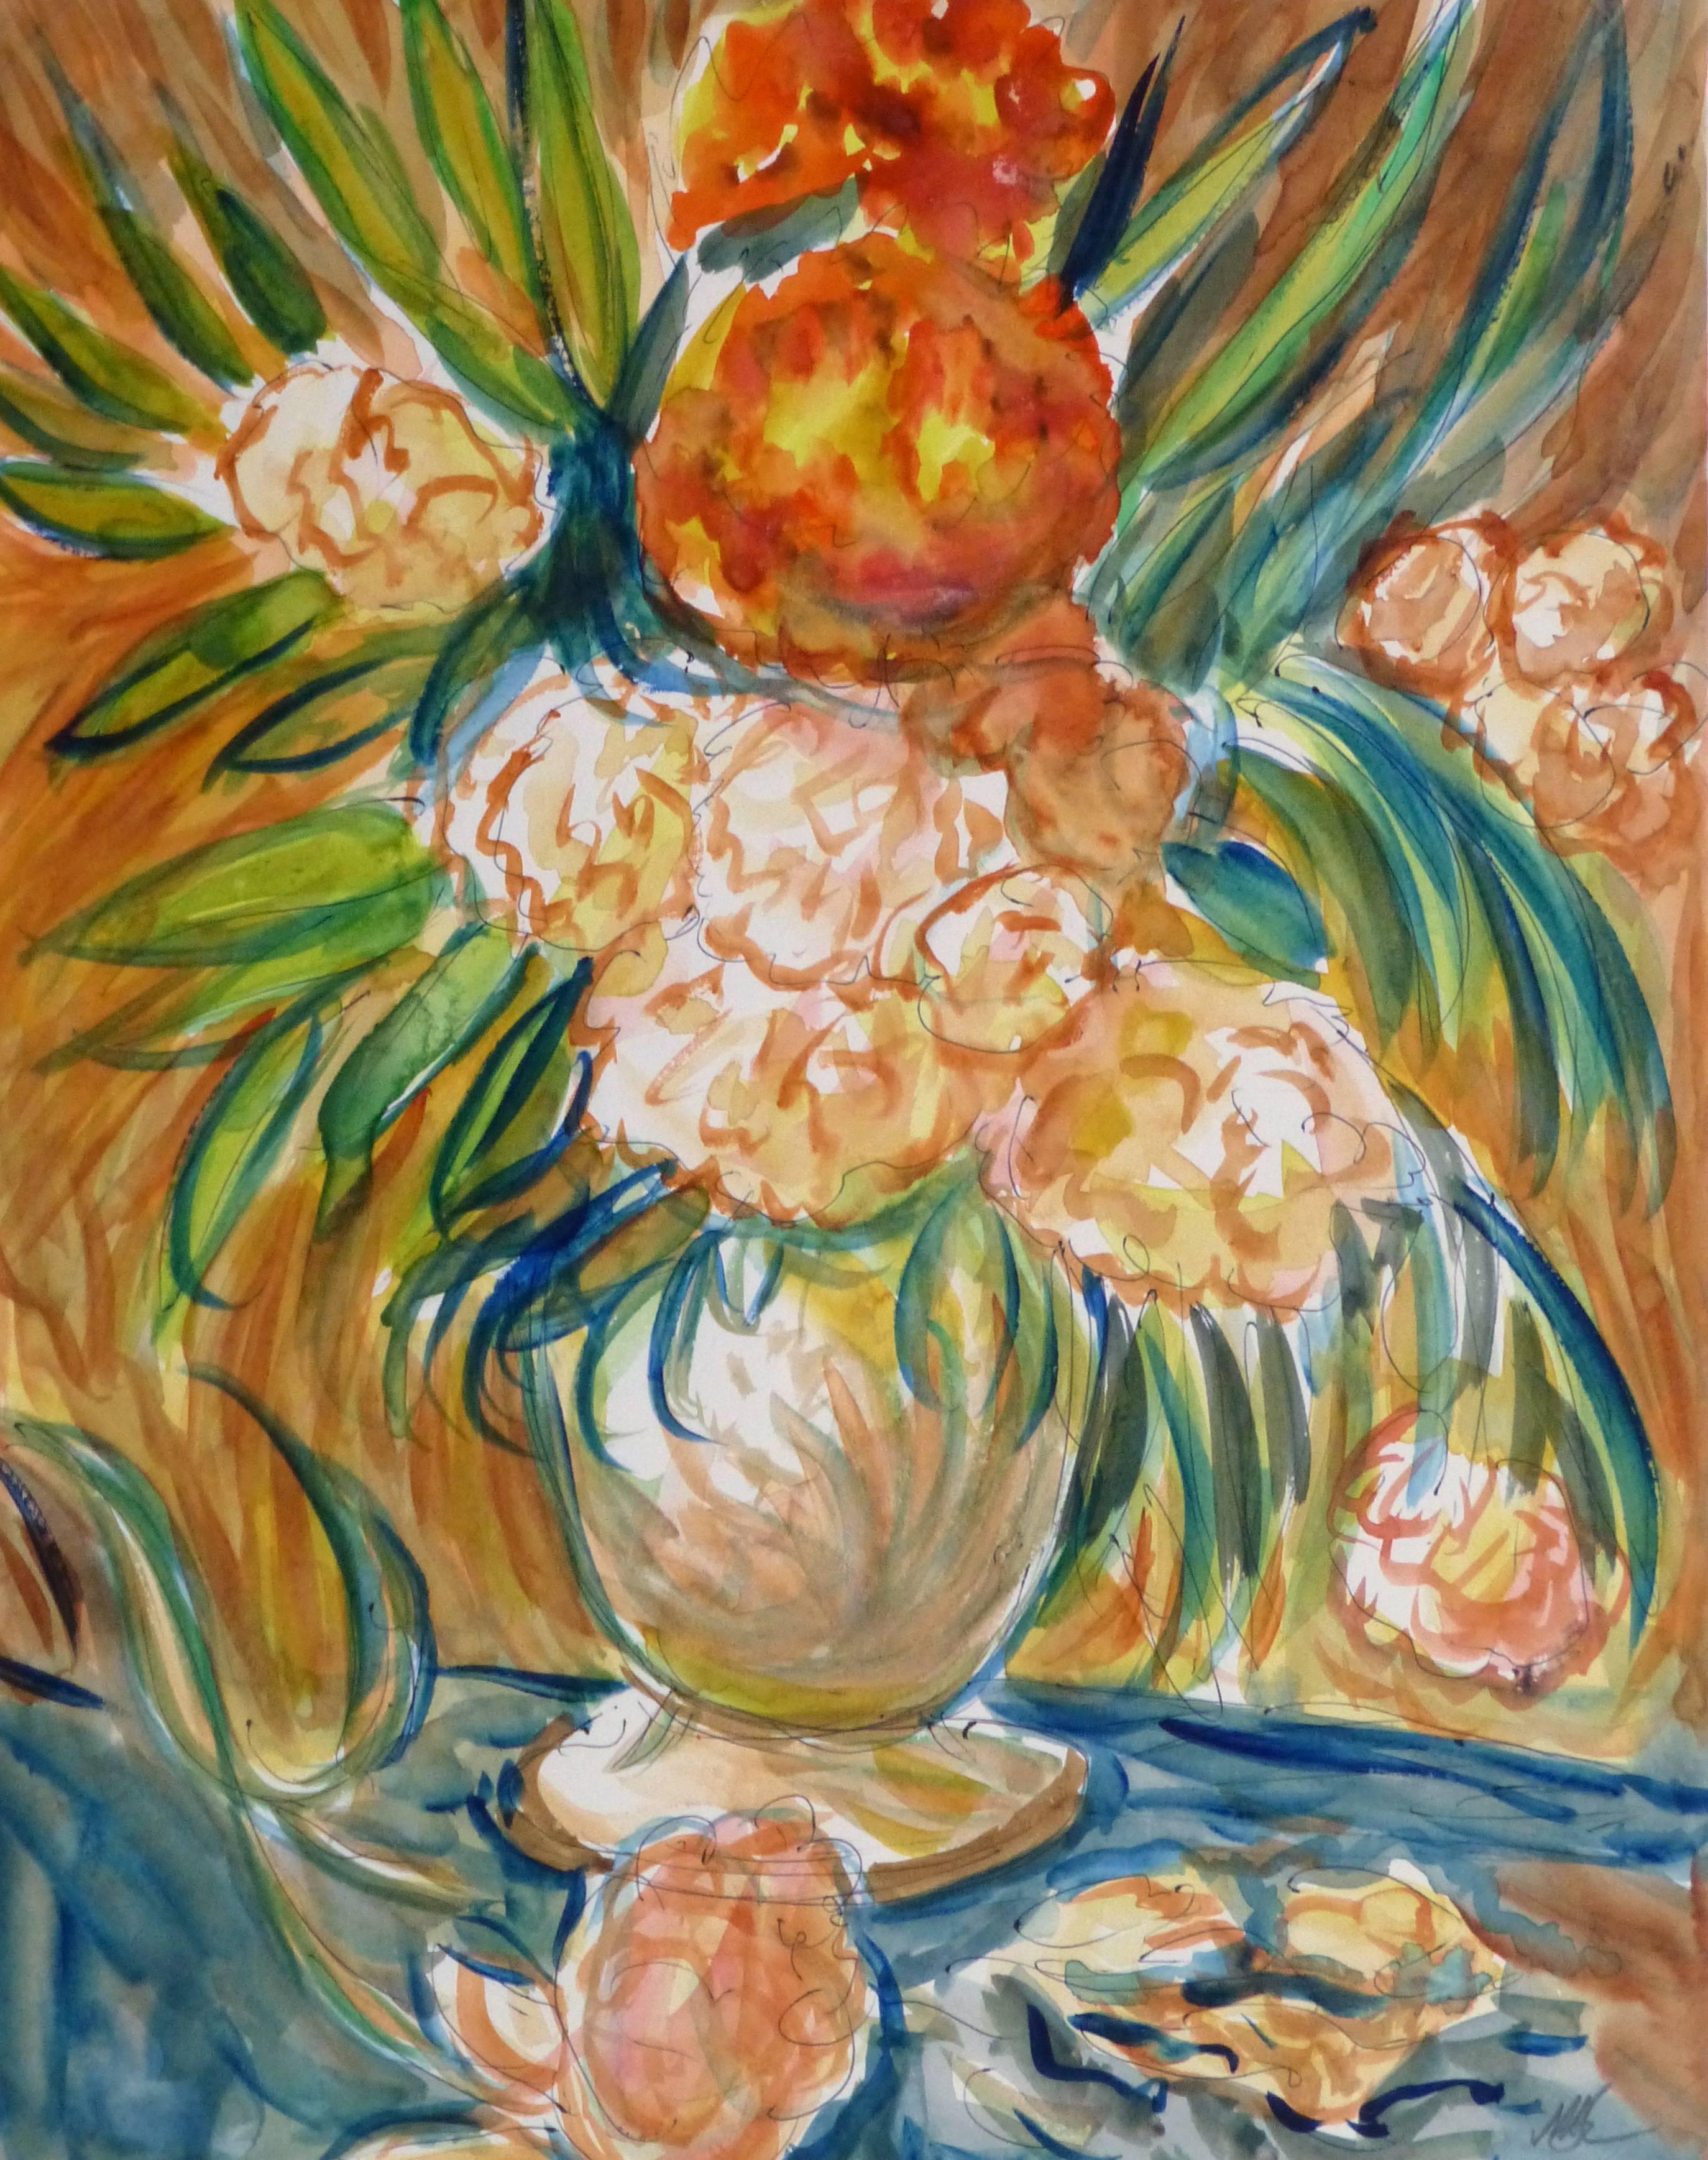 Unknown Still-Life Painting - Colorful Floral Bouquet and Tangerine Still Life Painting